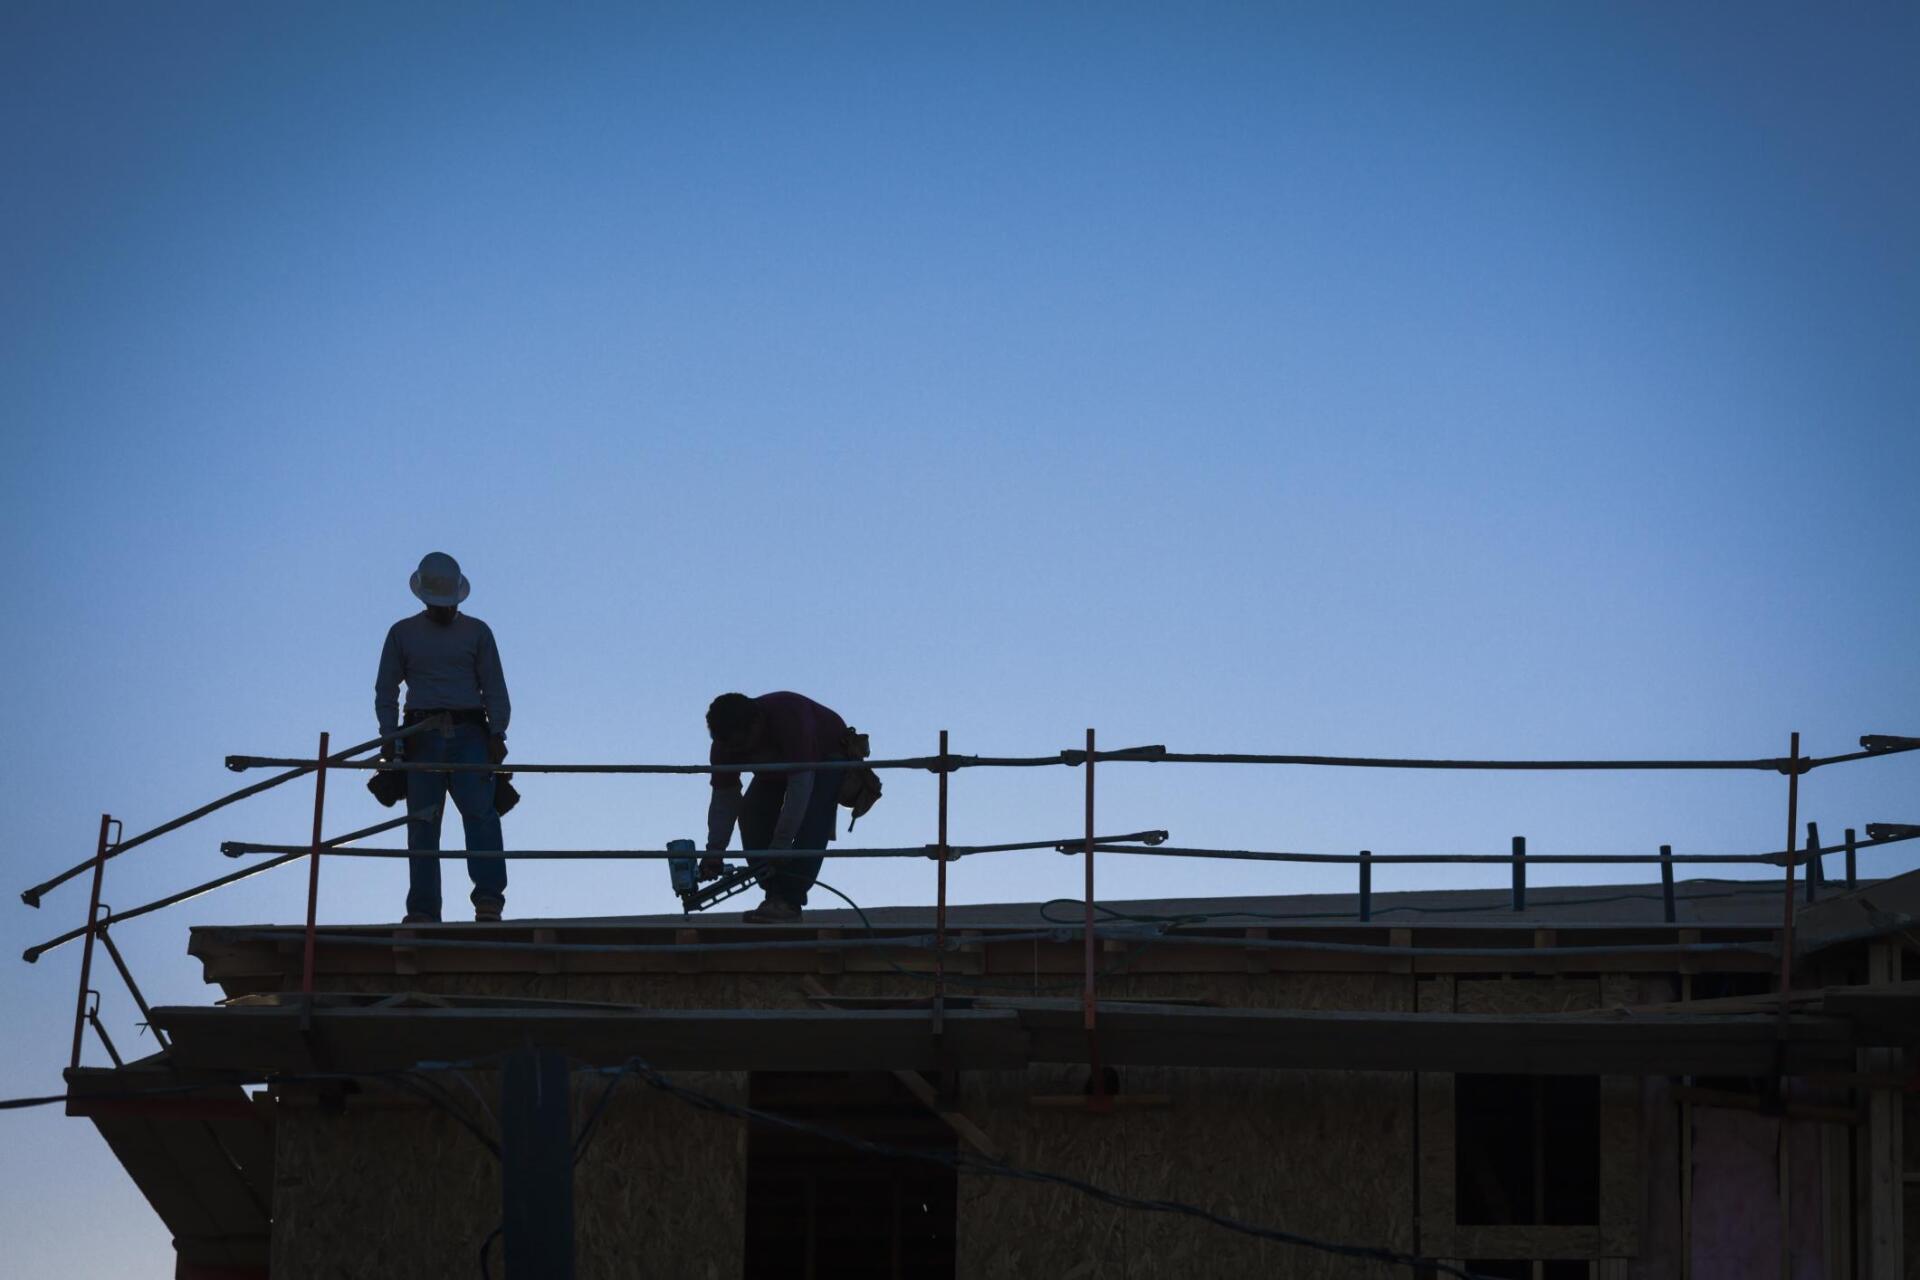 two workers repairing the roof